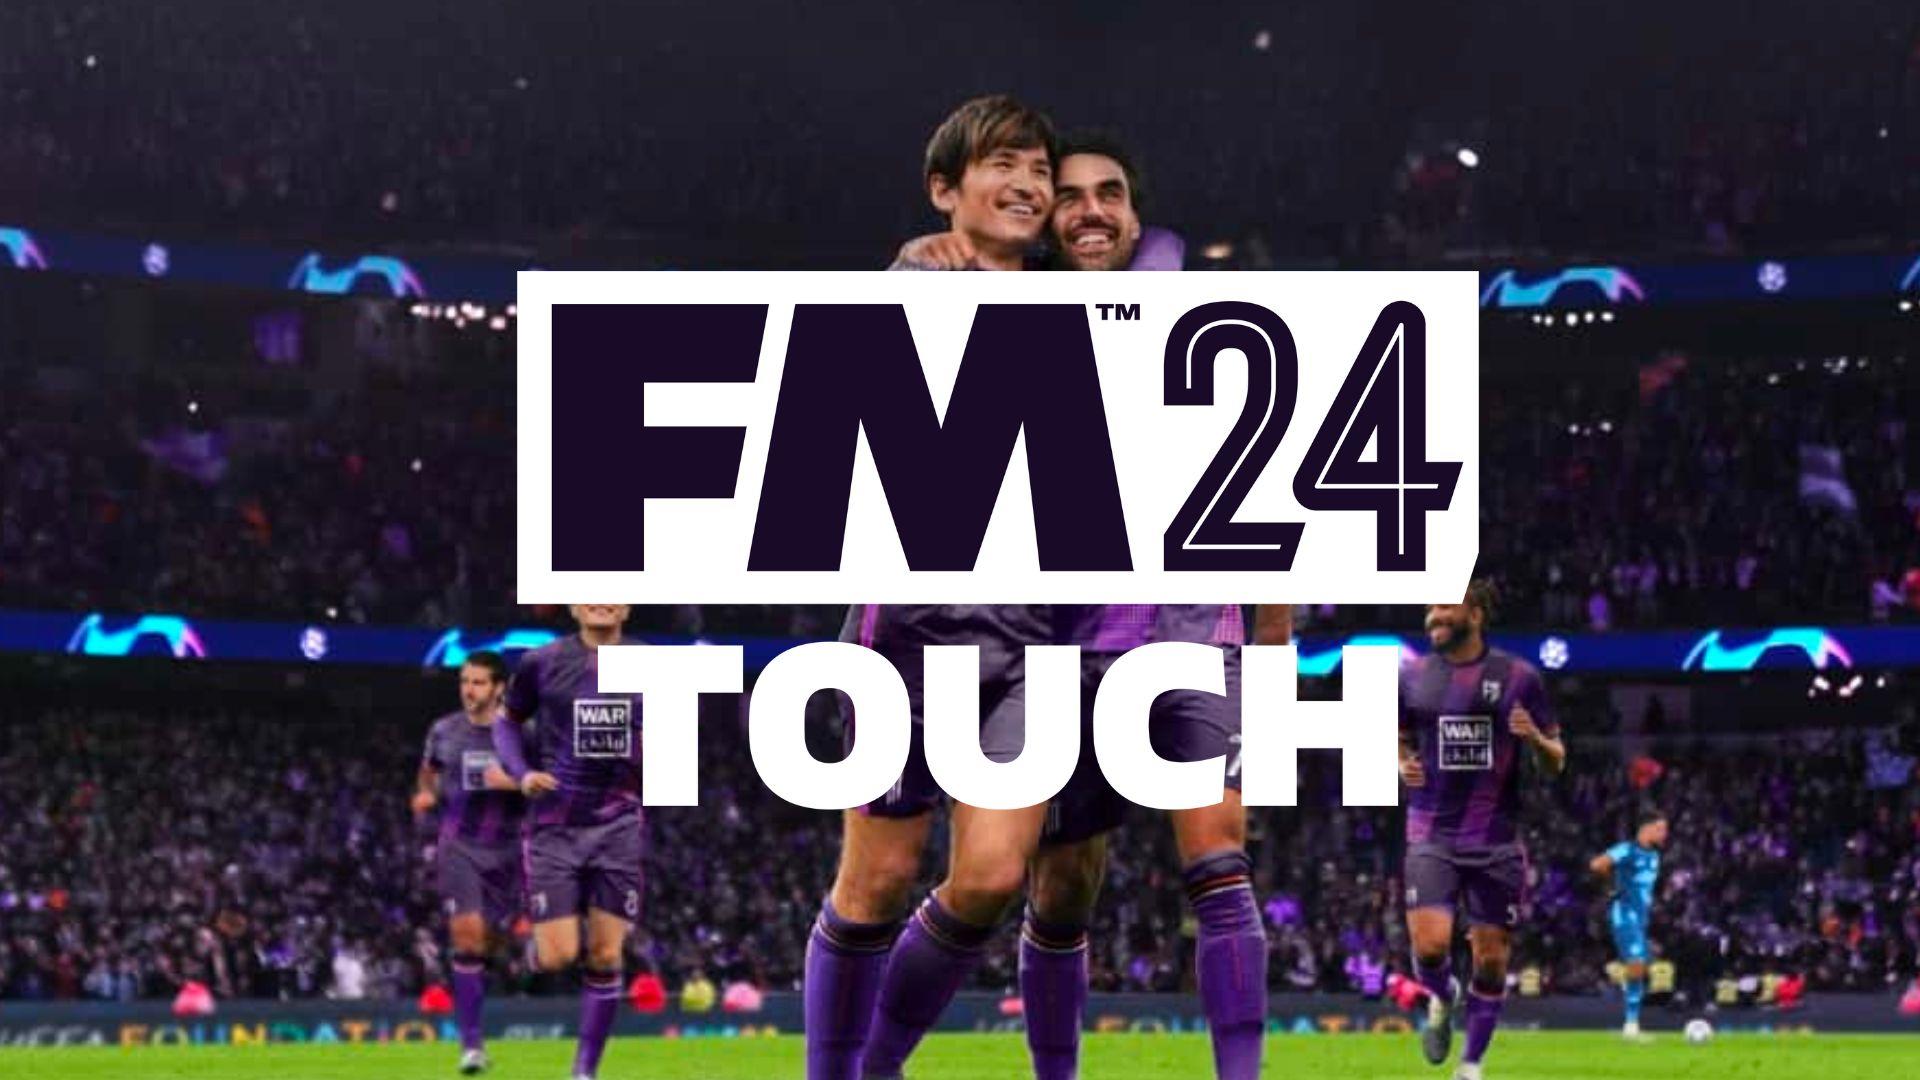 FM 24 Touch logo on top of players celebrating in purple kit